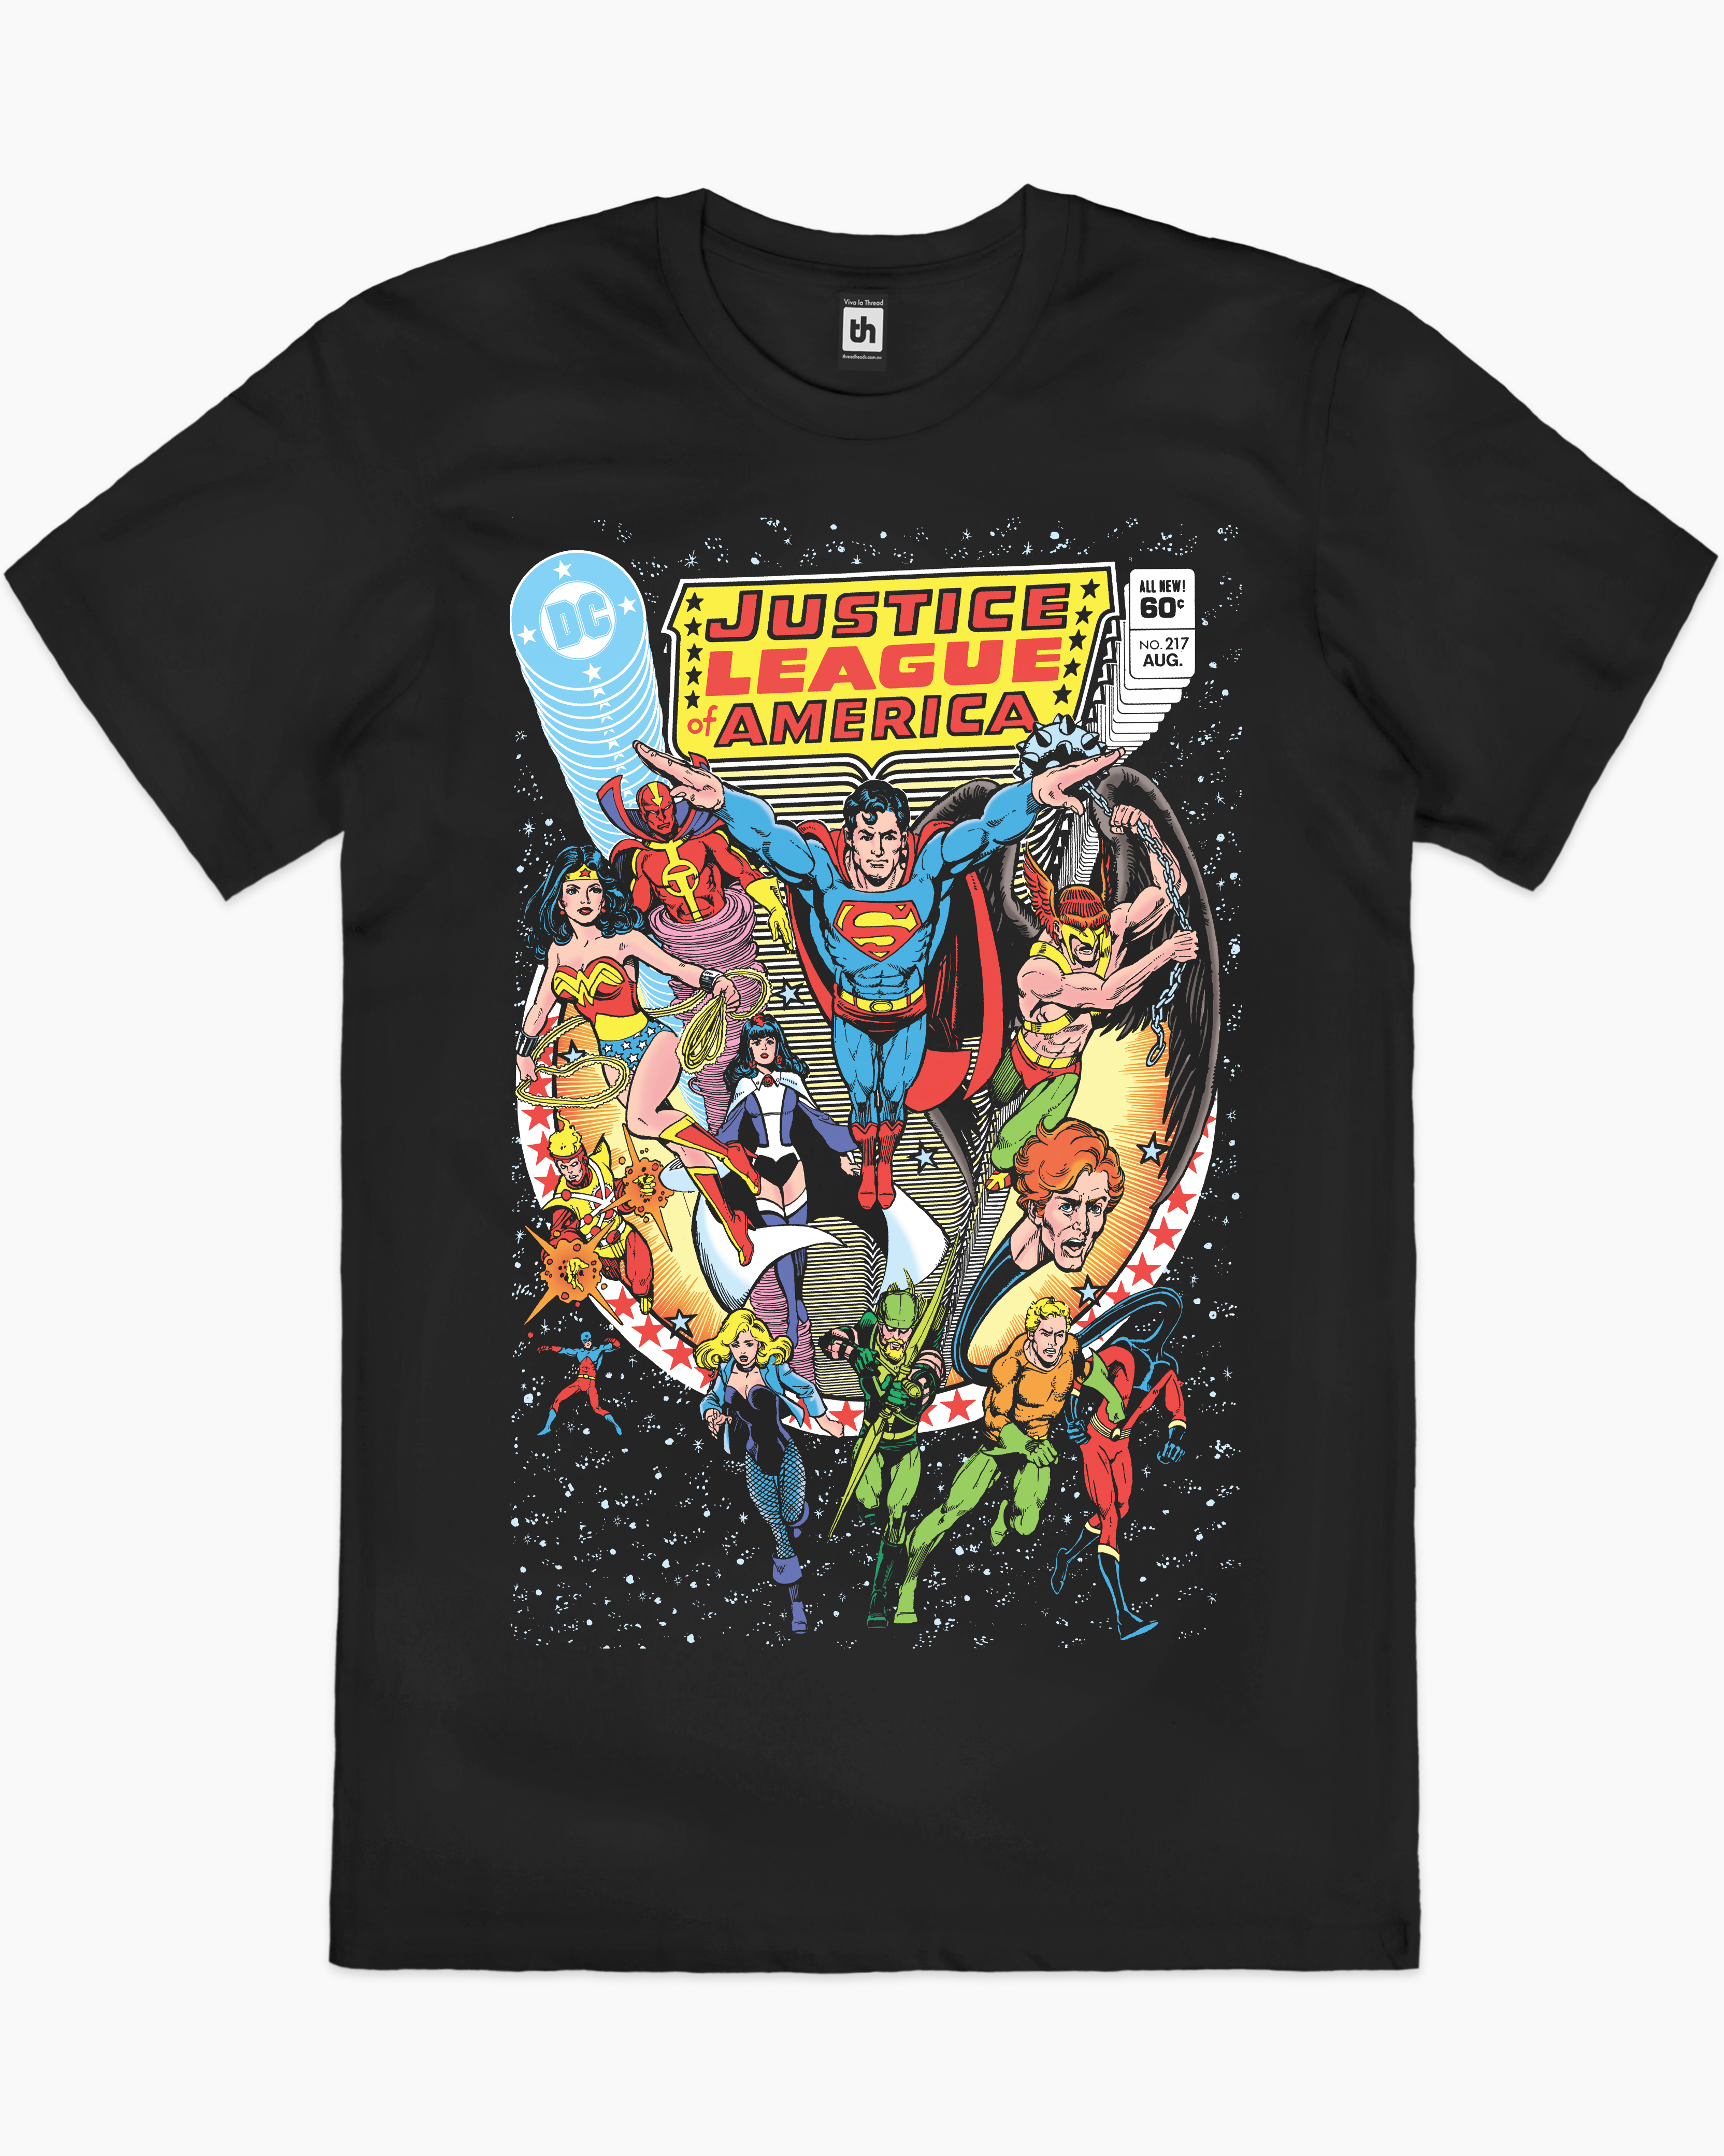 The Justice League of America T-Shirt